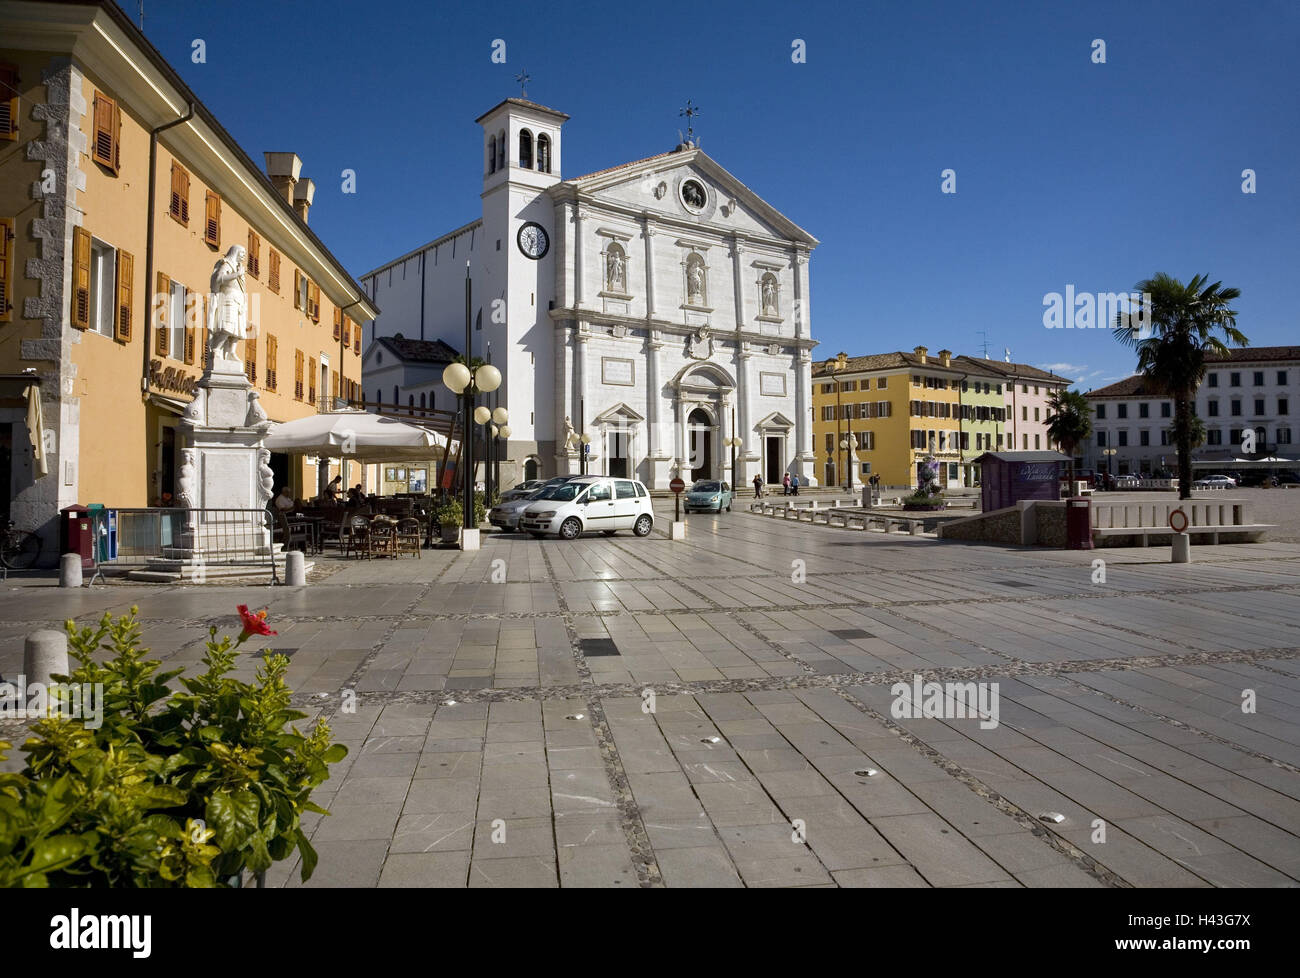 Italy, Palmanova, town square, cathedral, town, houses, buildings, space, church, parish church, baroque church, architecture, place of interest, destination, tourism, Stock Photo